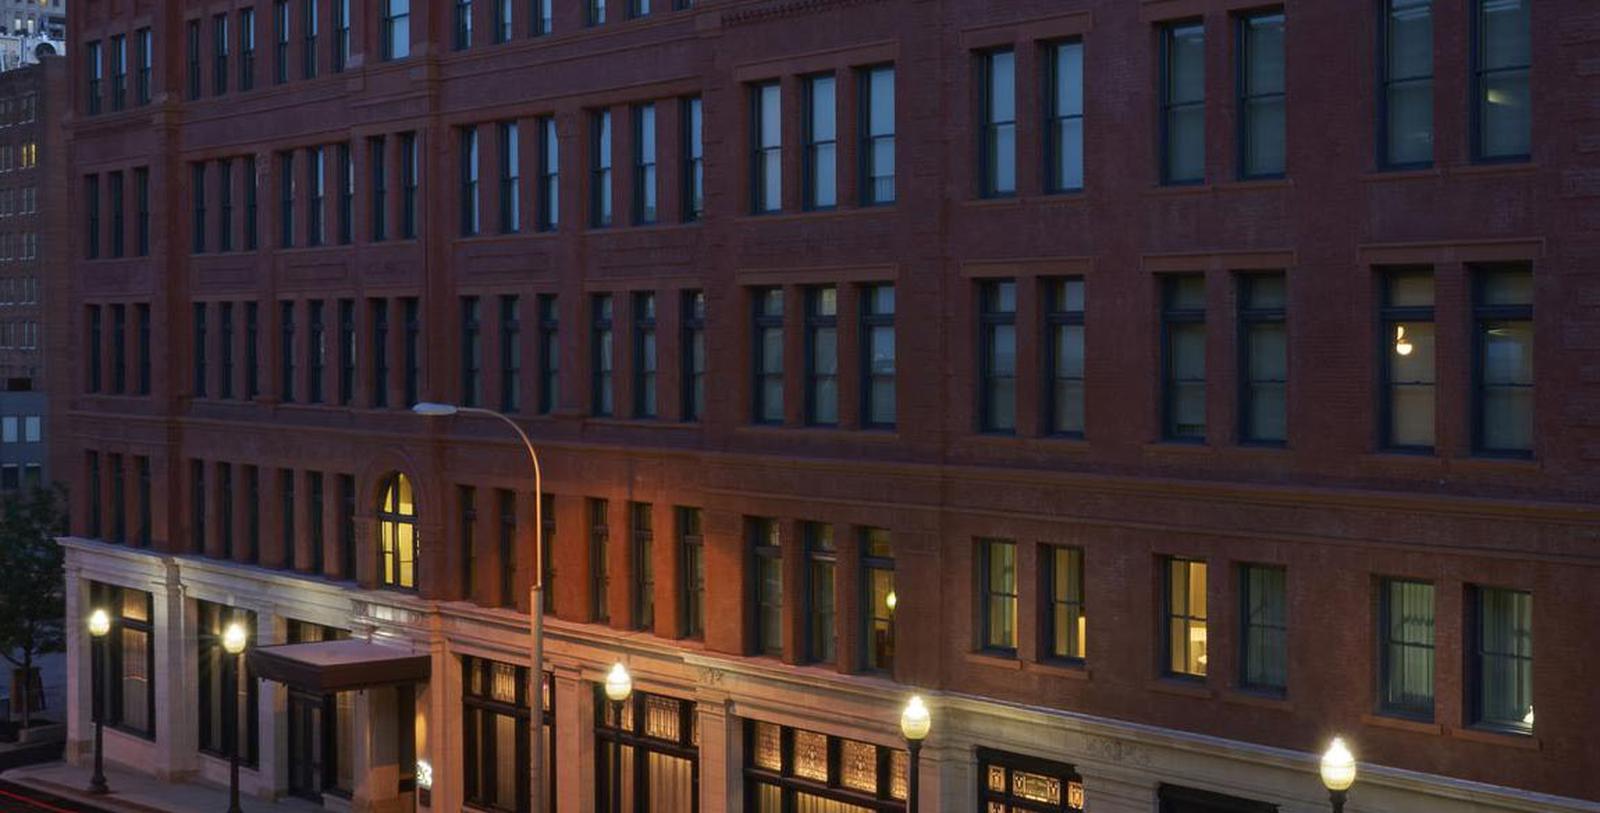 Discover the unique Arts & Crafts-style architecture of the 21c Museum Hotel Kansas City.